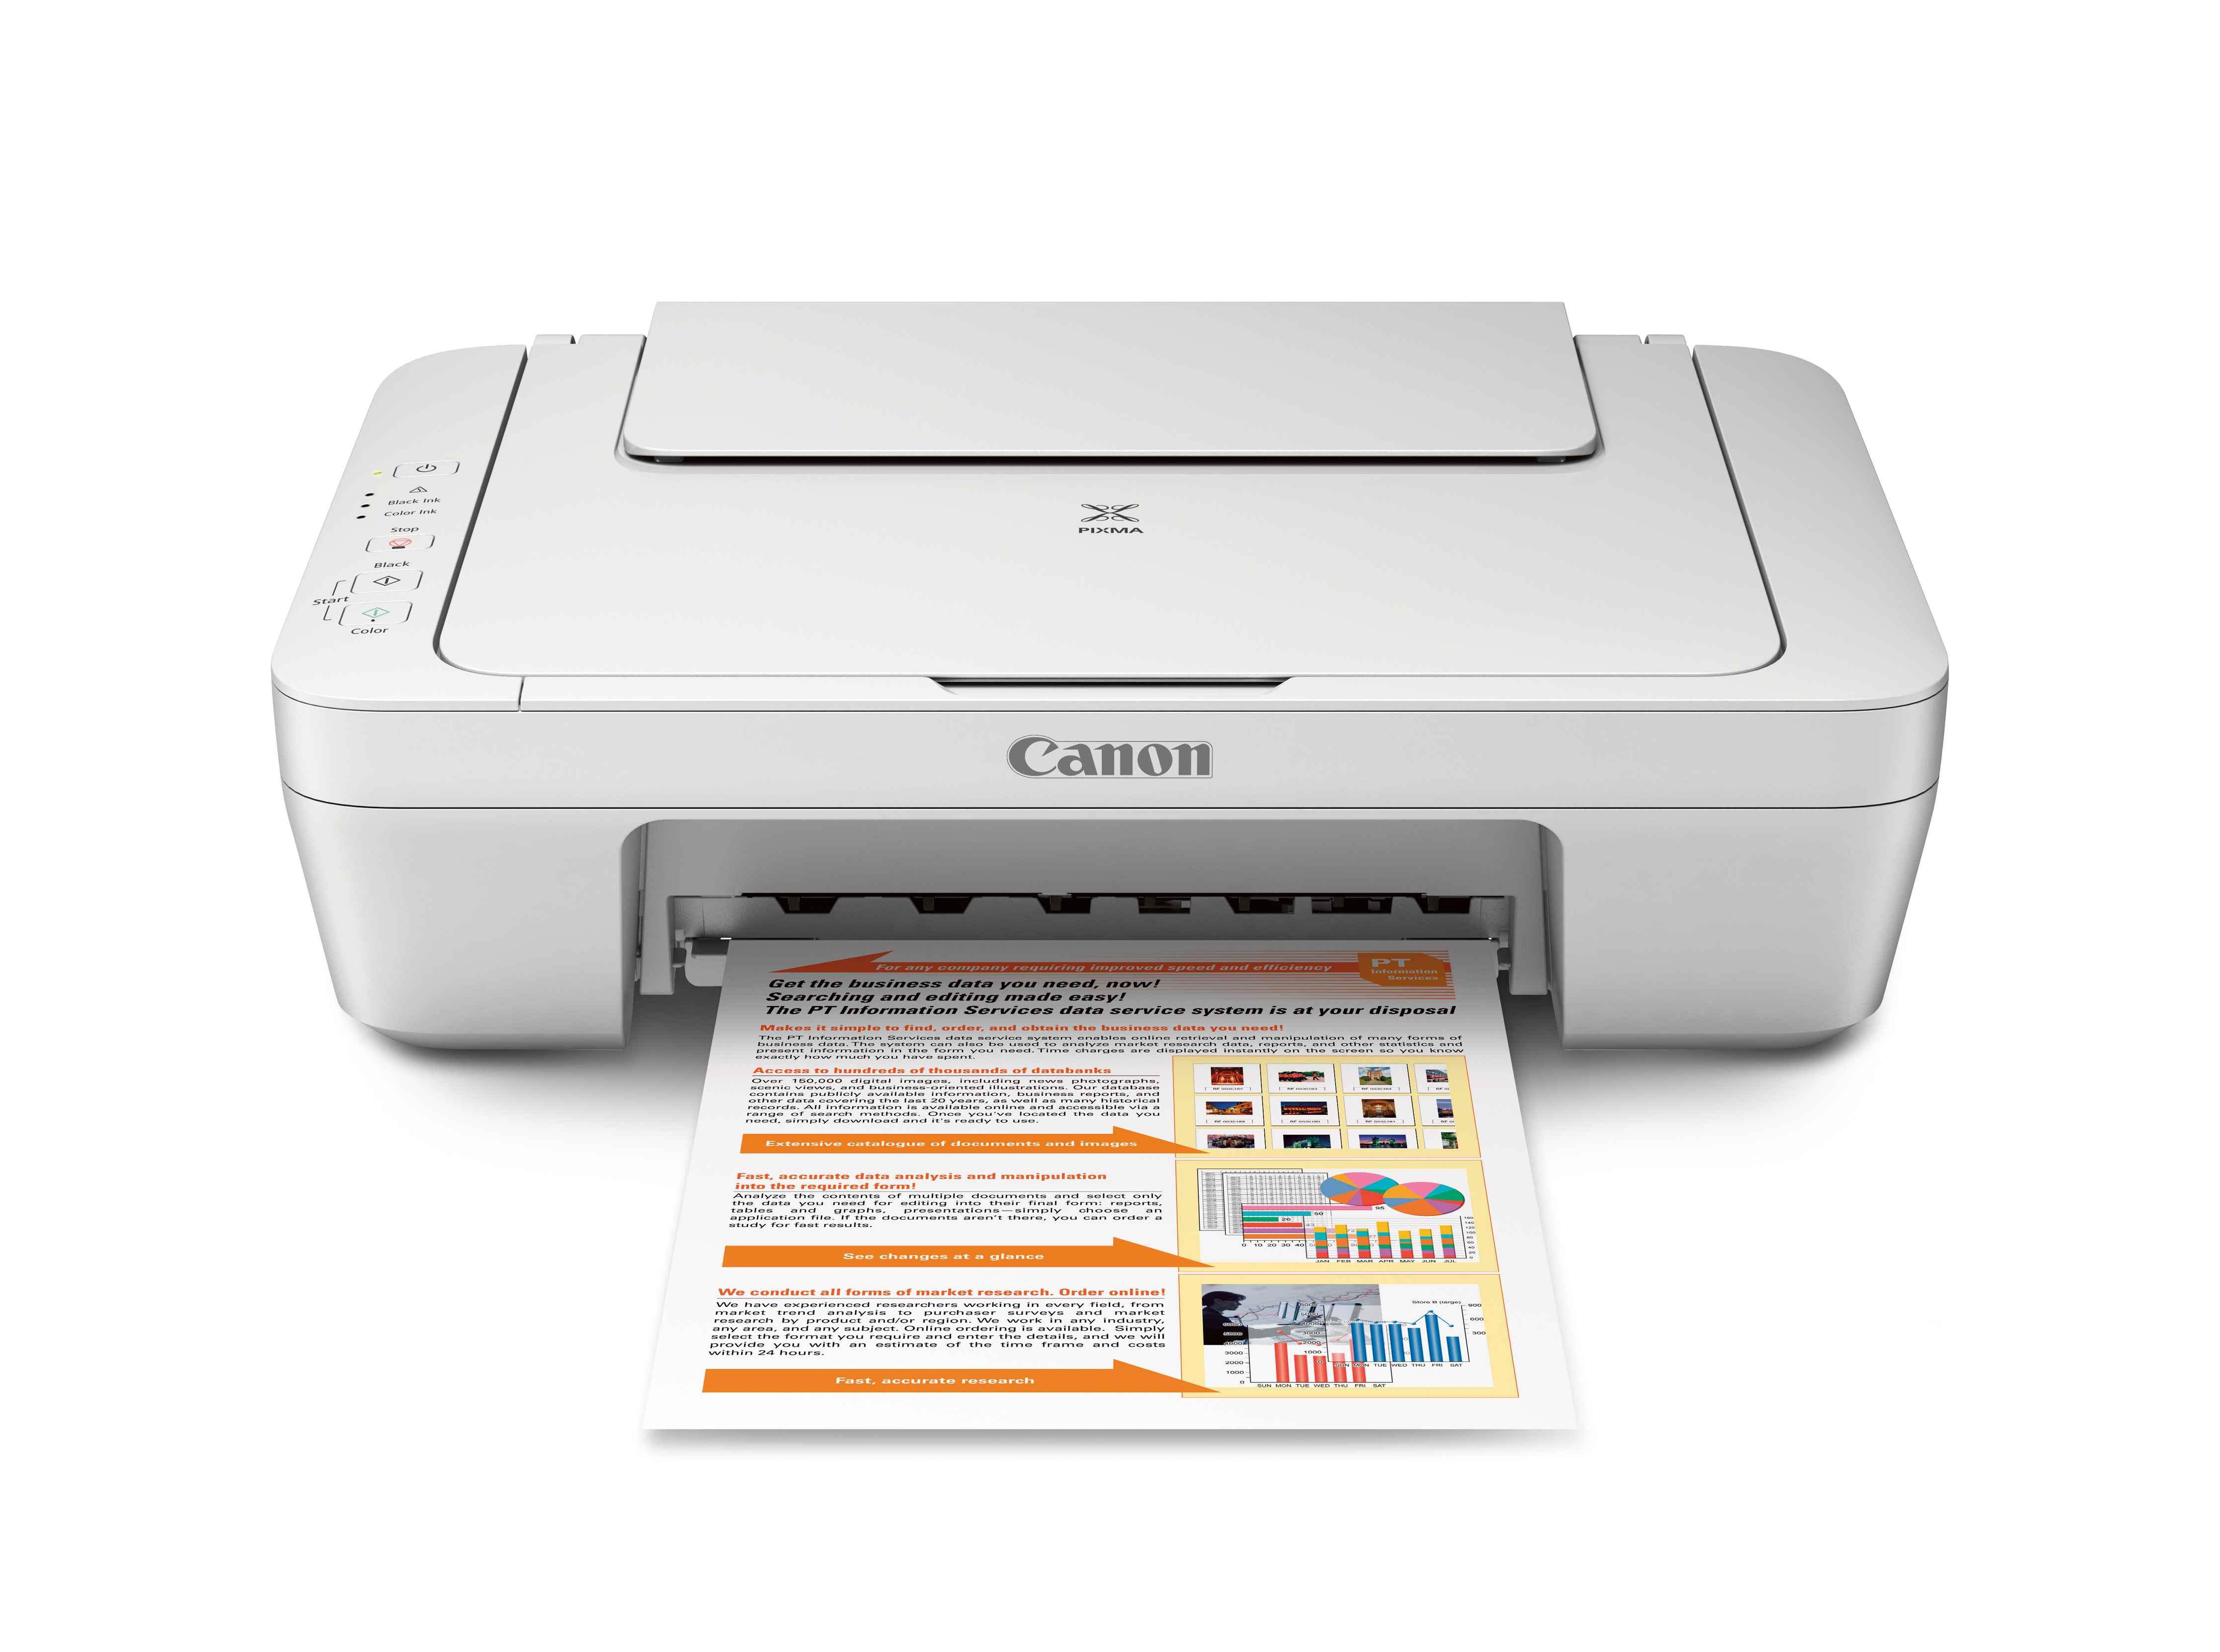 Canon PIXMA MG2522 Wired All-in-One Color Inkjet Printer [USB Cable Included], White - image 5 of 6